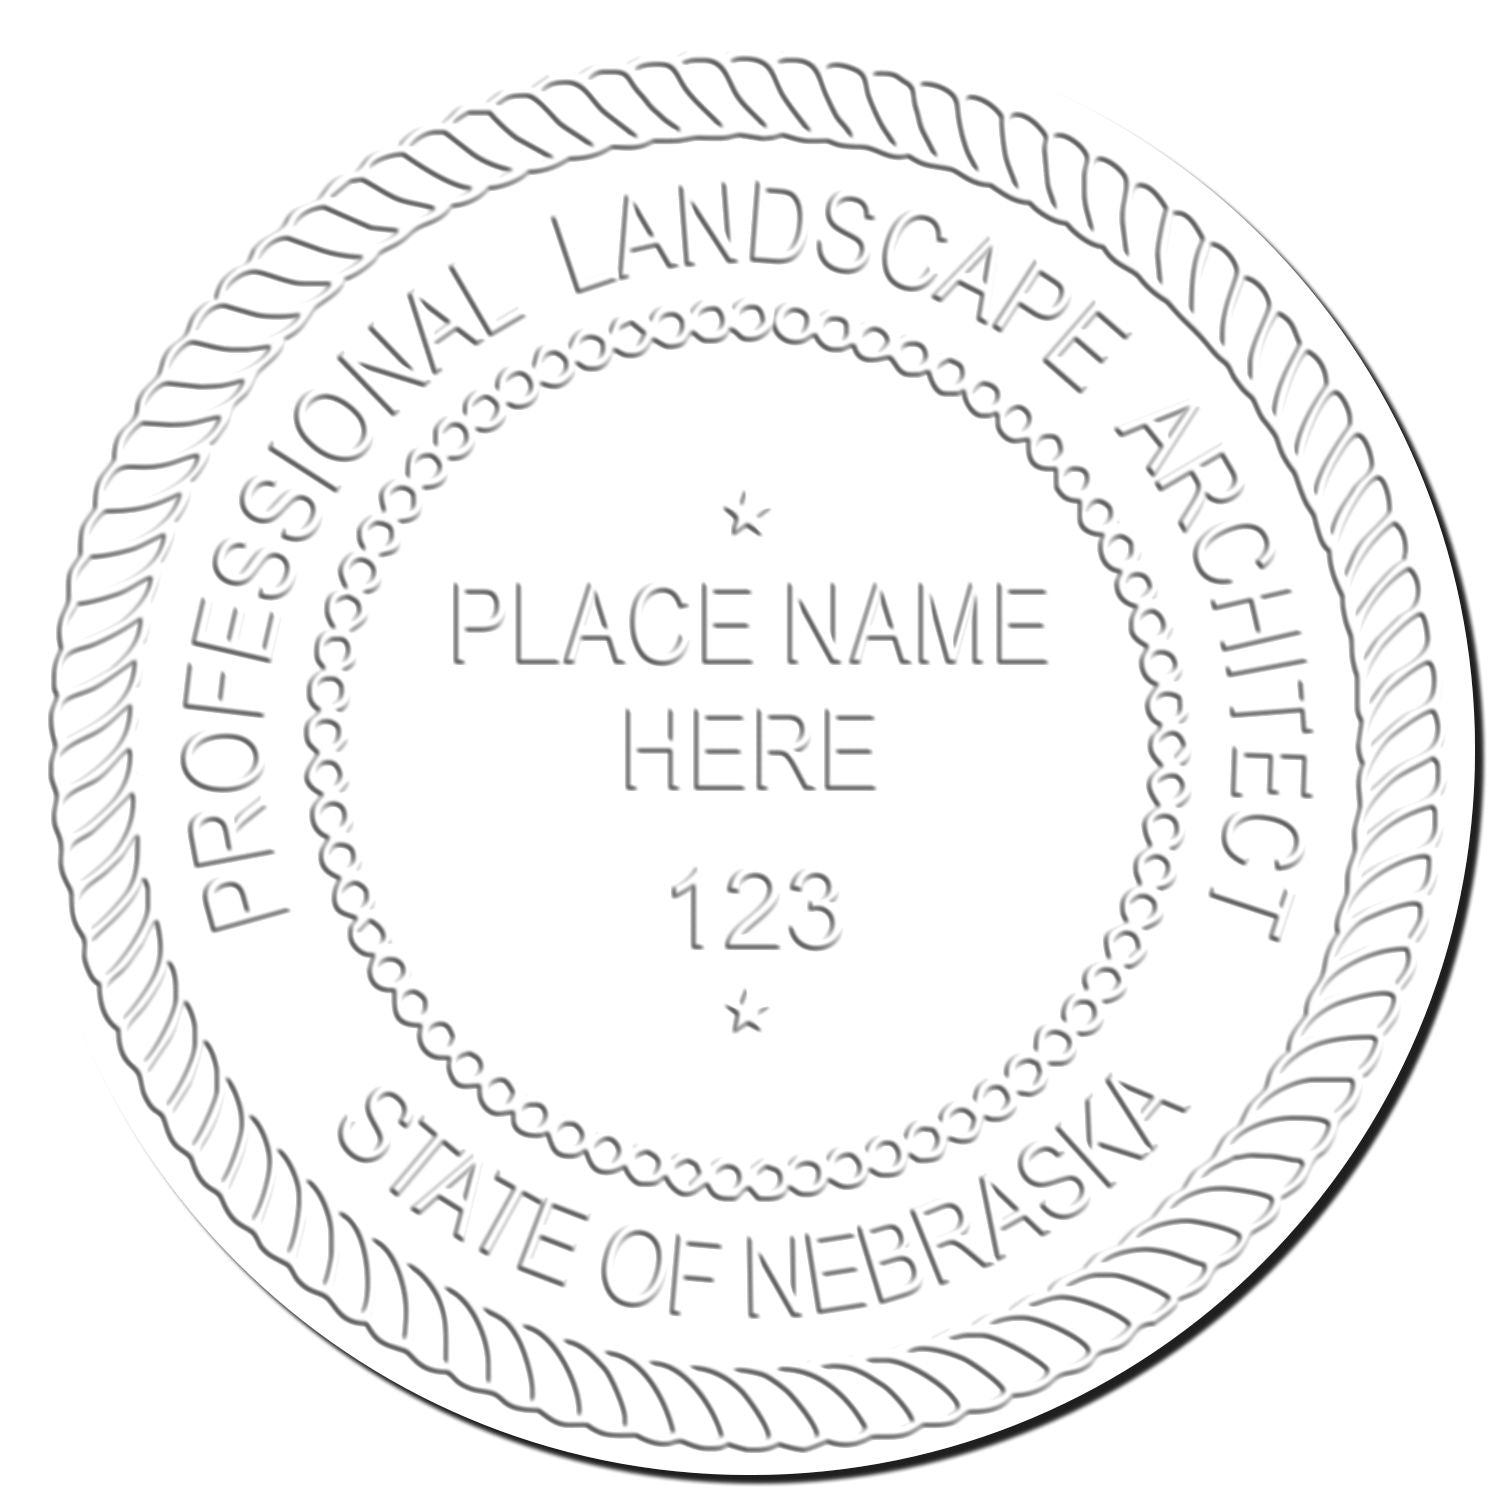 This paper is stamped with a sample imprint of the Nebraska Long Reach Landscape Architect Embossing Stamp, signifying its quality and reliability.